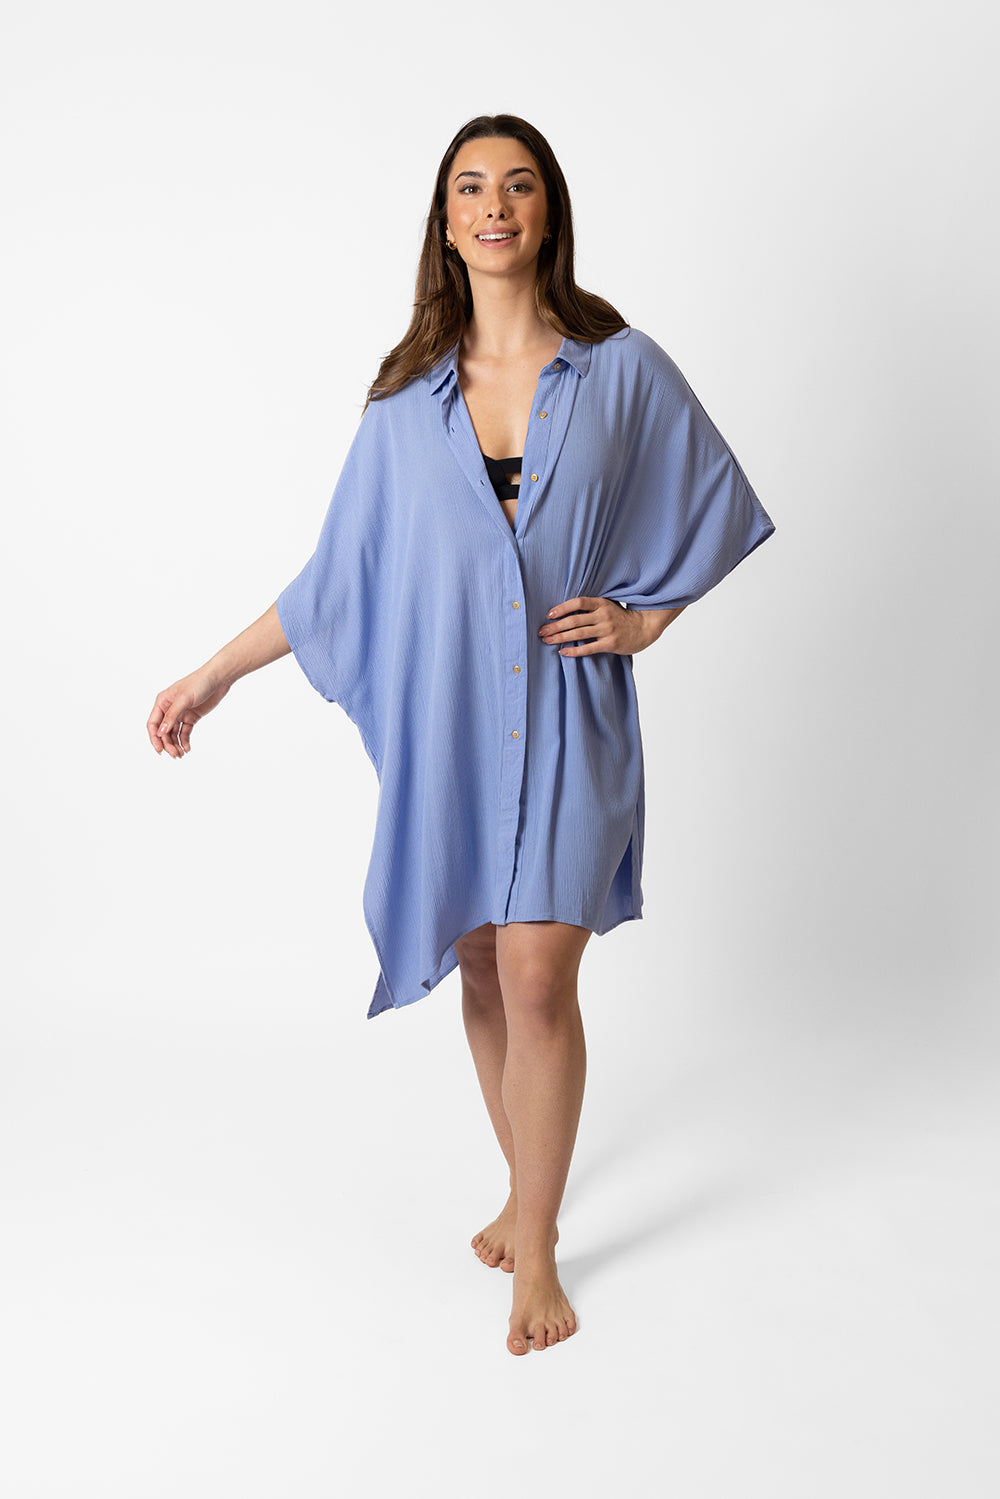 Koy resort miami big shirt dress in yellow bahama blue periwinkle color. Beach cover up and resort wear for women. 